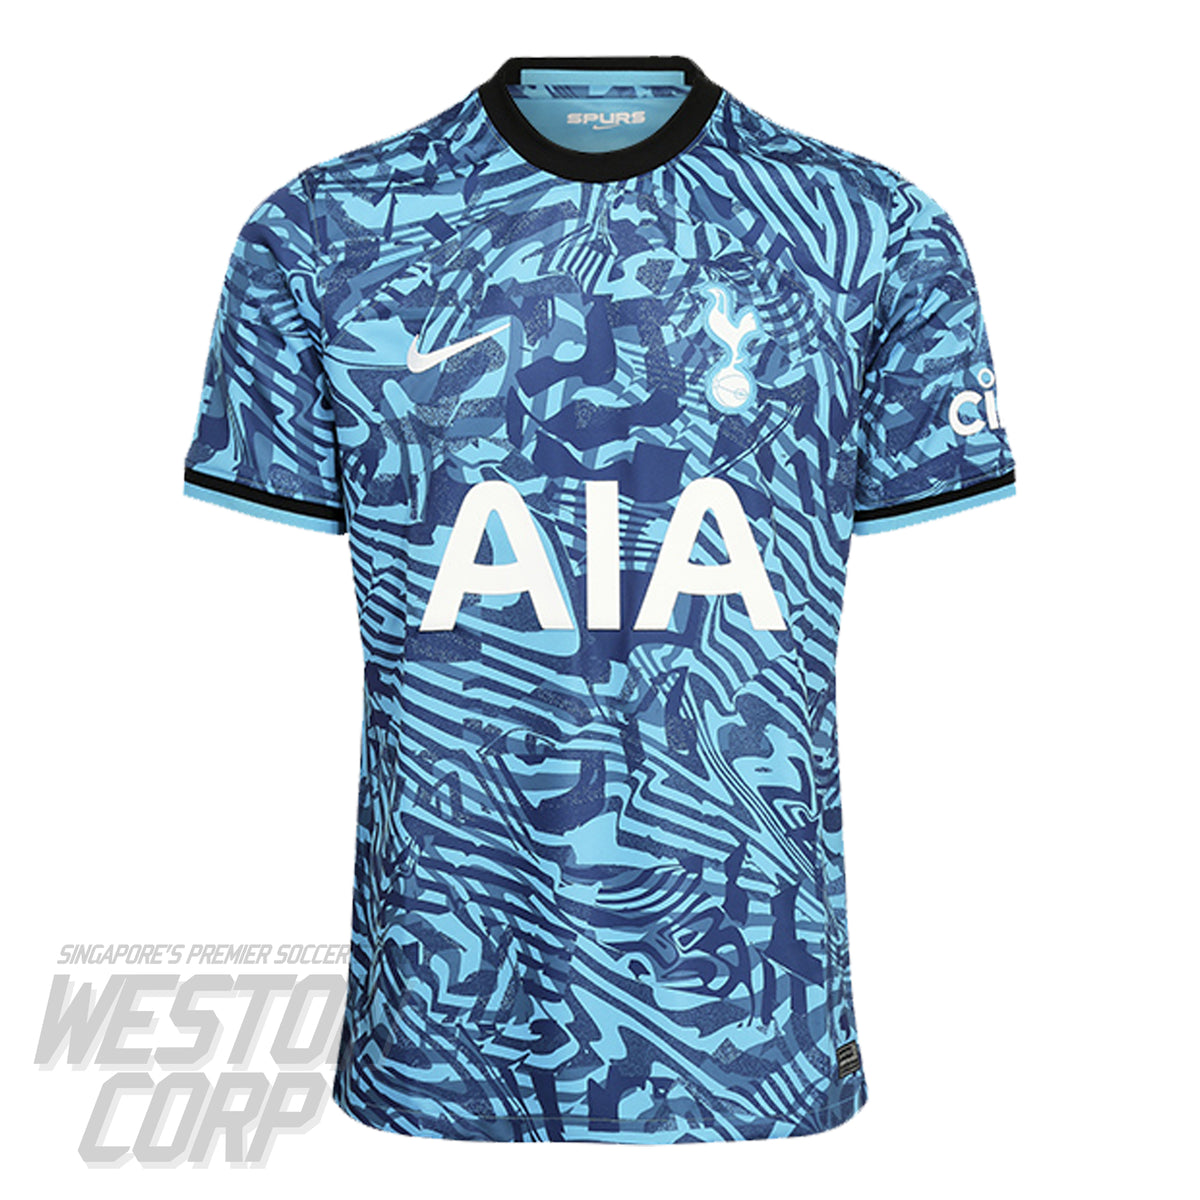 Tottenham Hotspur 23/24 Away Kit Available now at all Weston stores and  online #Spurs #NikeFootball #WestonSG